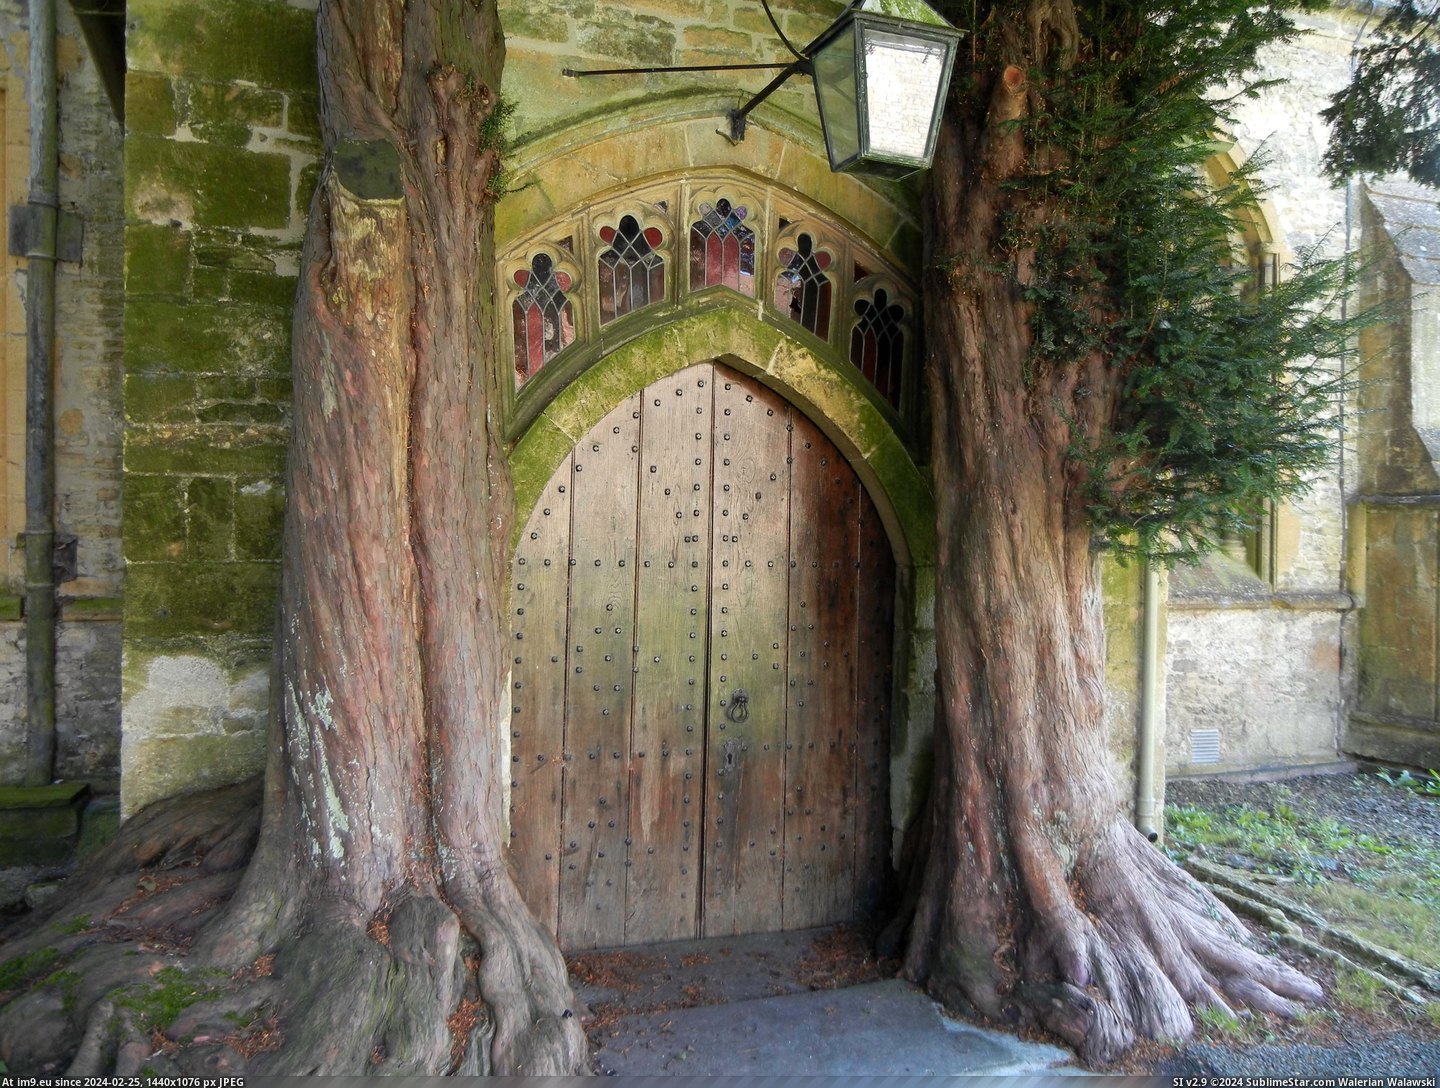 #Door #Church #Entrance #Tolkien #Gloucestershire #Medieval #Inspiration #Believed [Pics] Medieval church door in Gloucestershire believed to be the inspiration for Tolkien's entrance to Moria Pic. (Изображение из альбом My r/PICS favs))